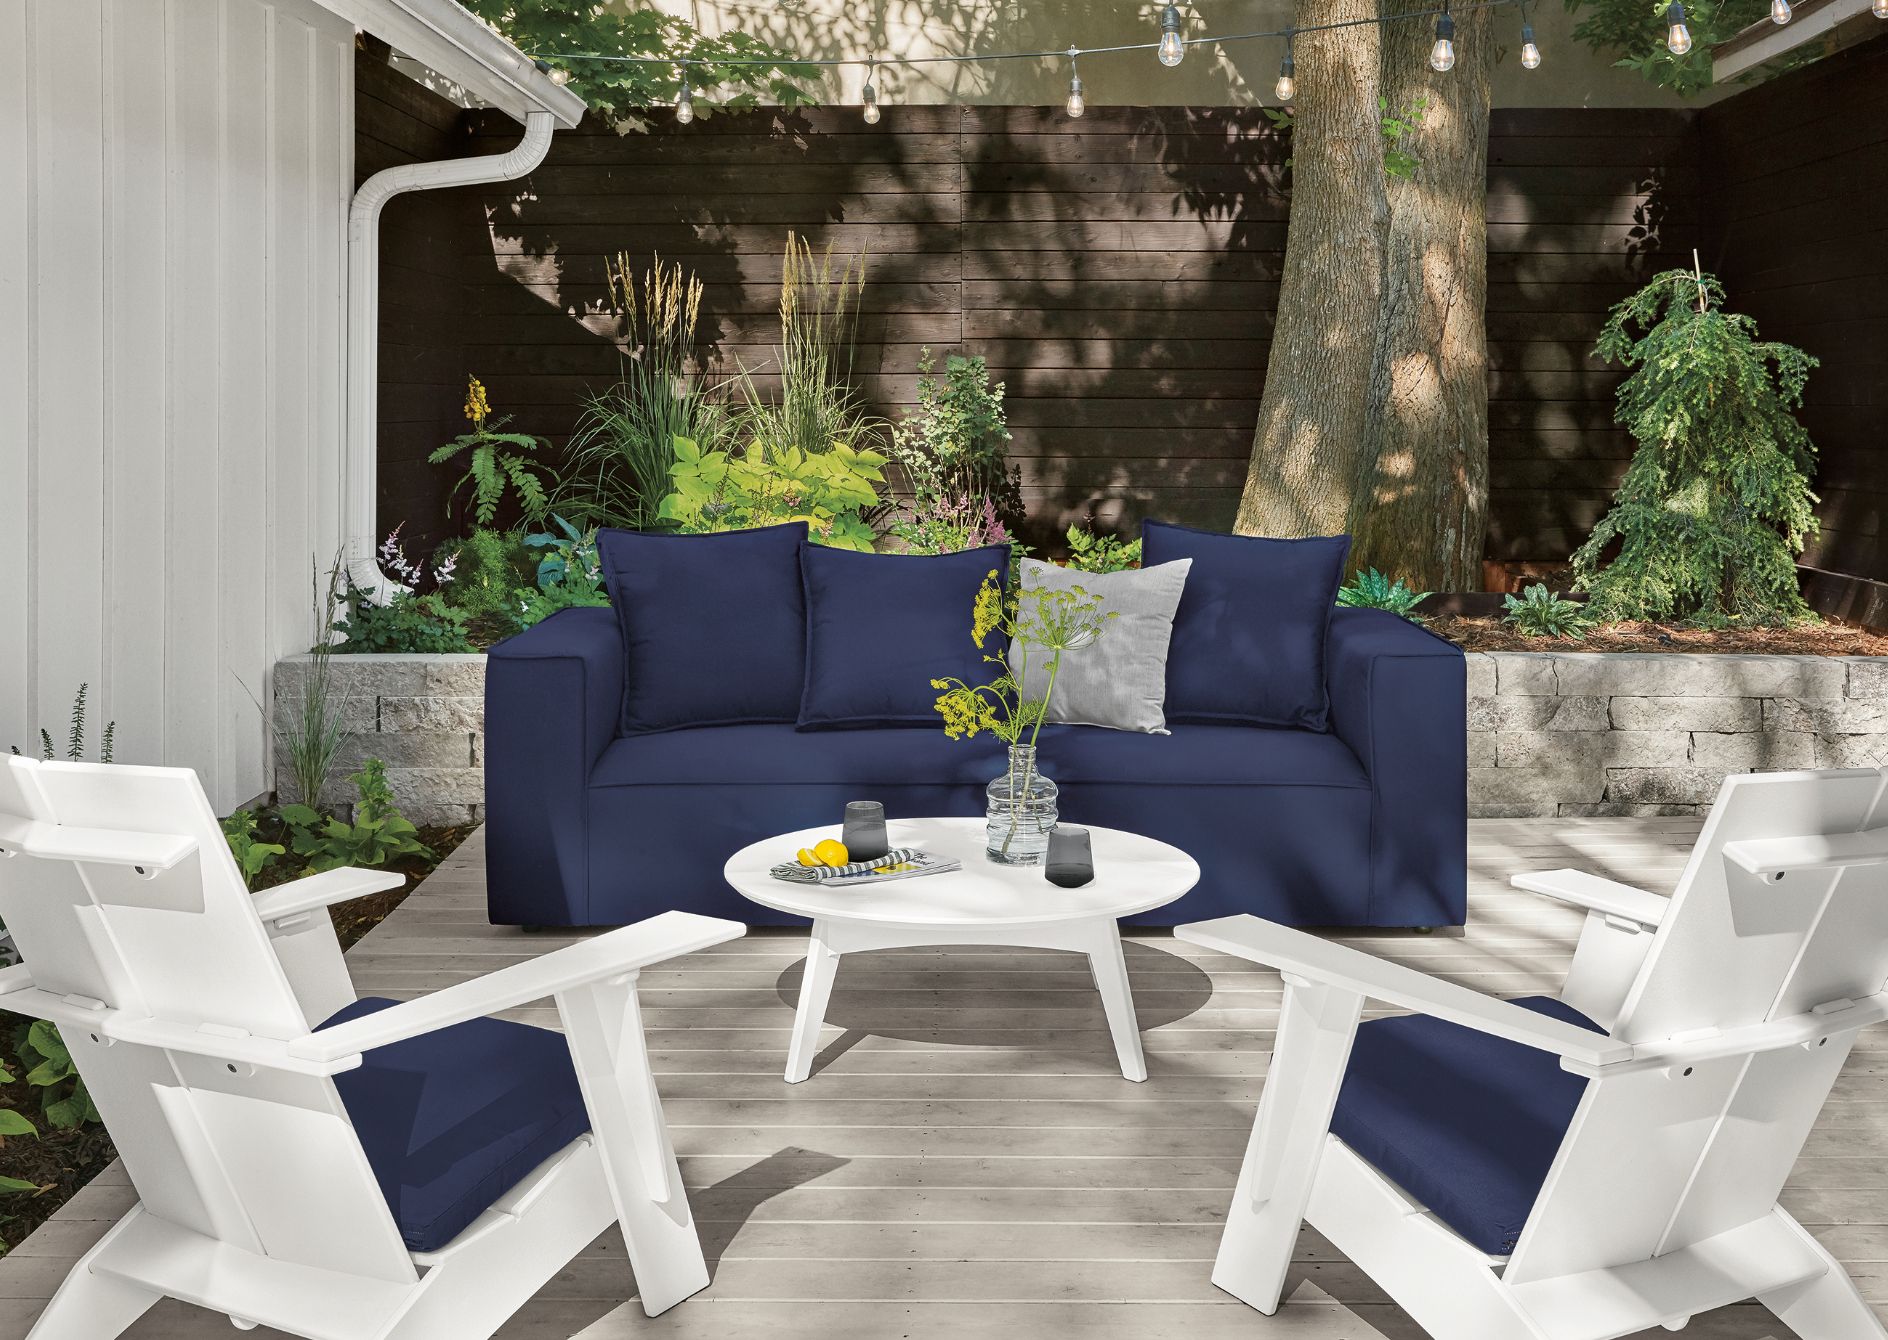 Outdoor Furniture For Small Spaces Ideas Advice Room Board